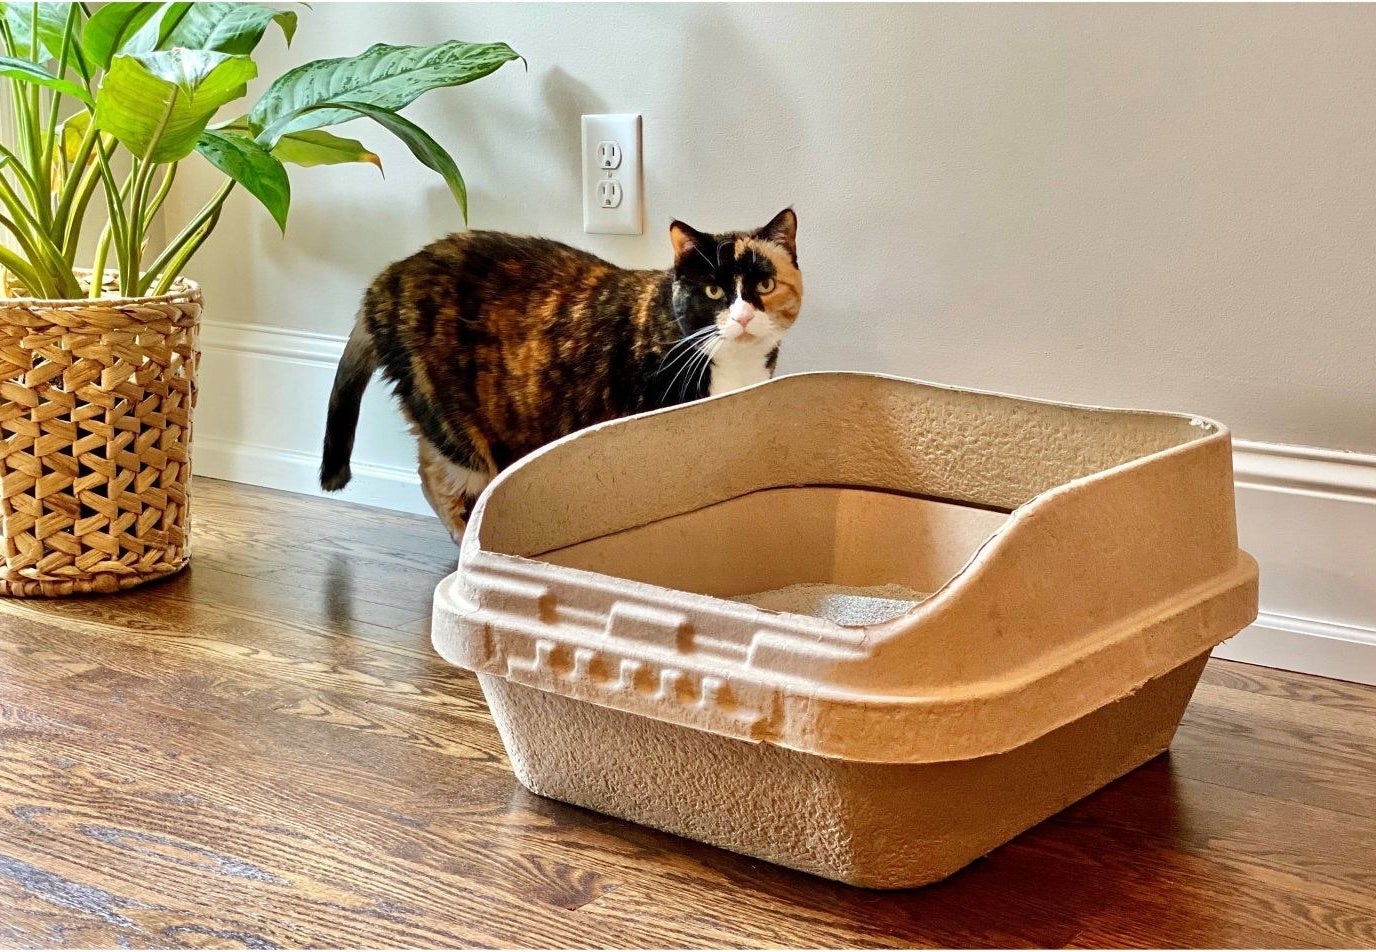 The disposable cardboard litter box